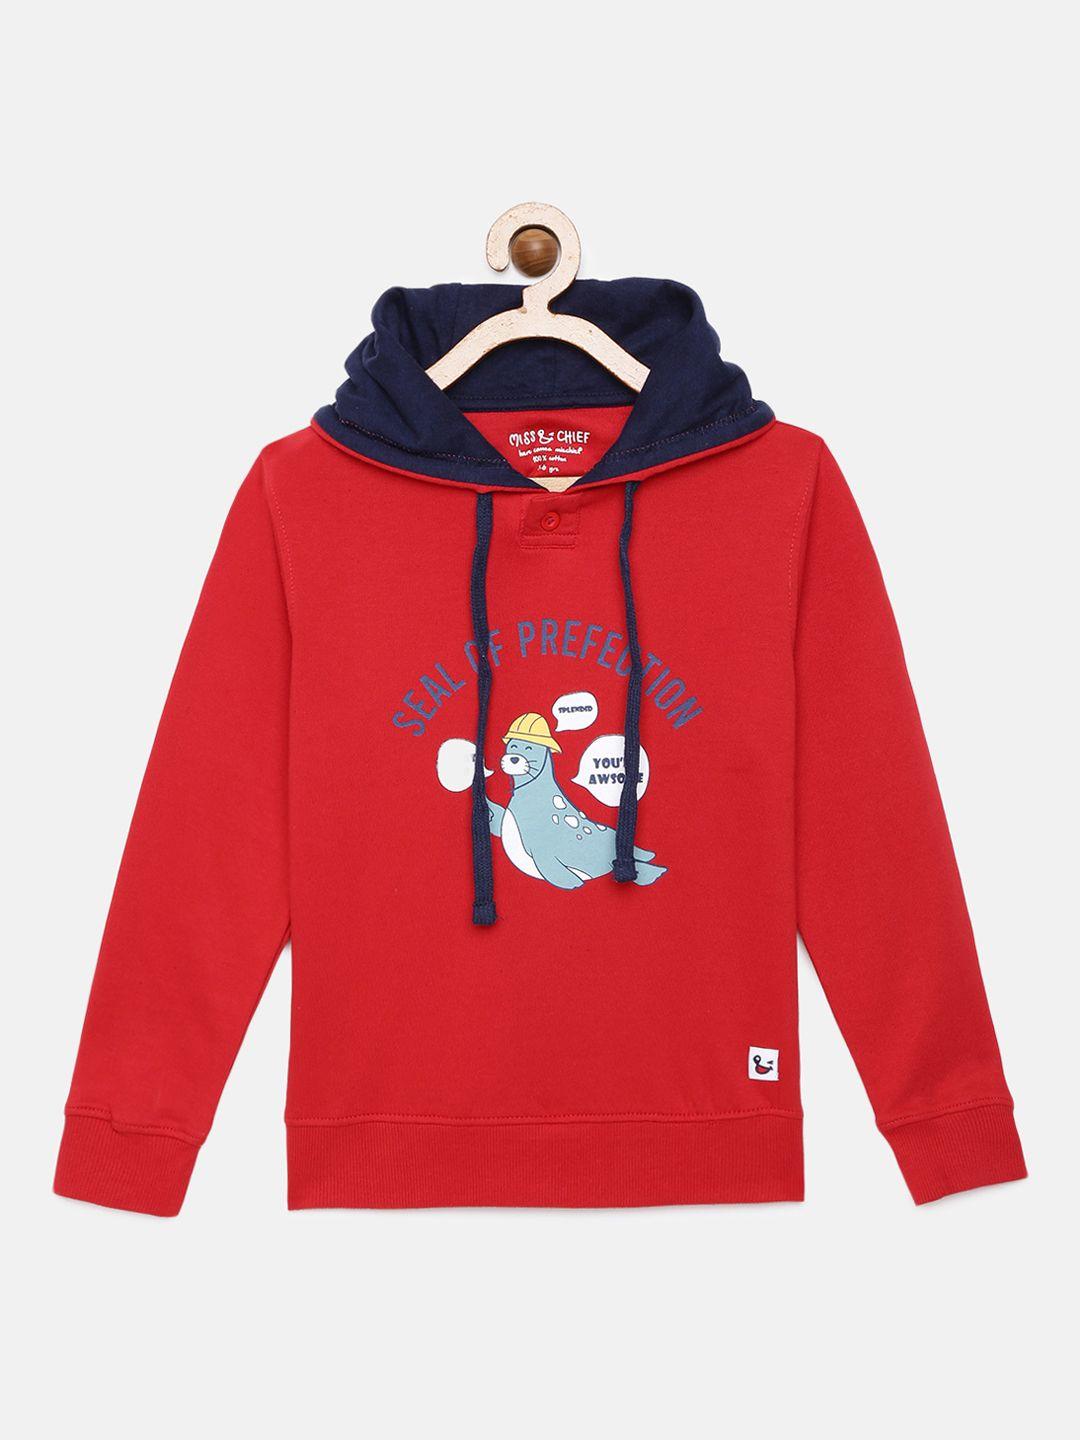 miss & chief boys red printed pure cotton hooded sweatshirt